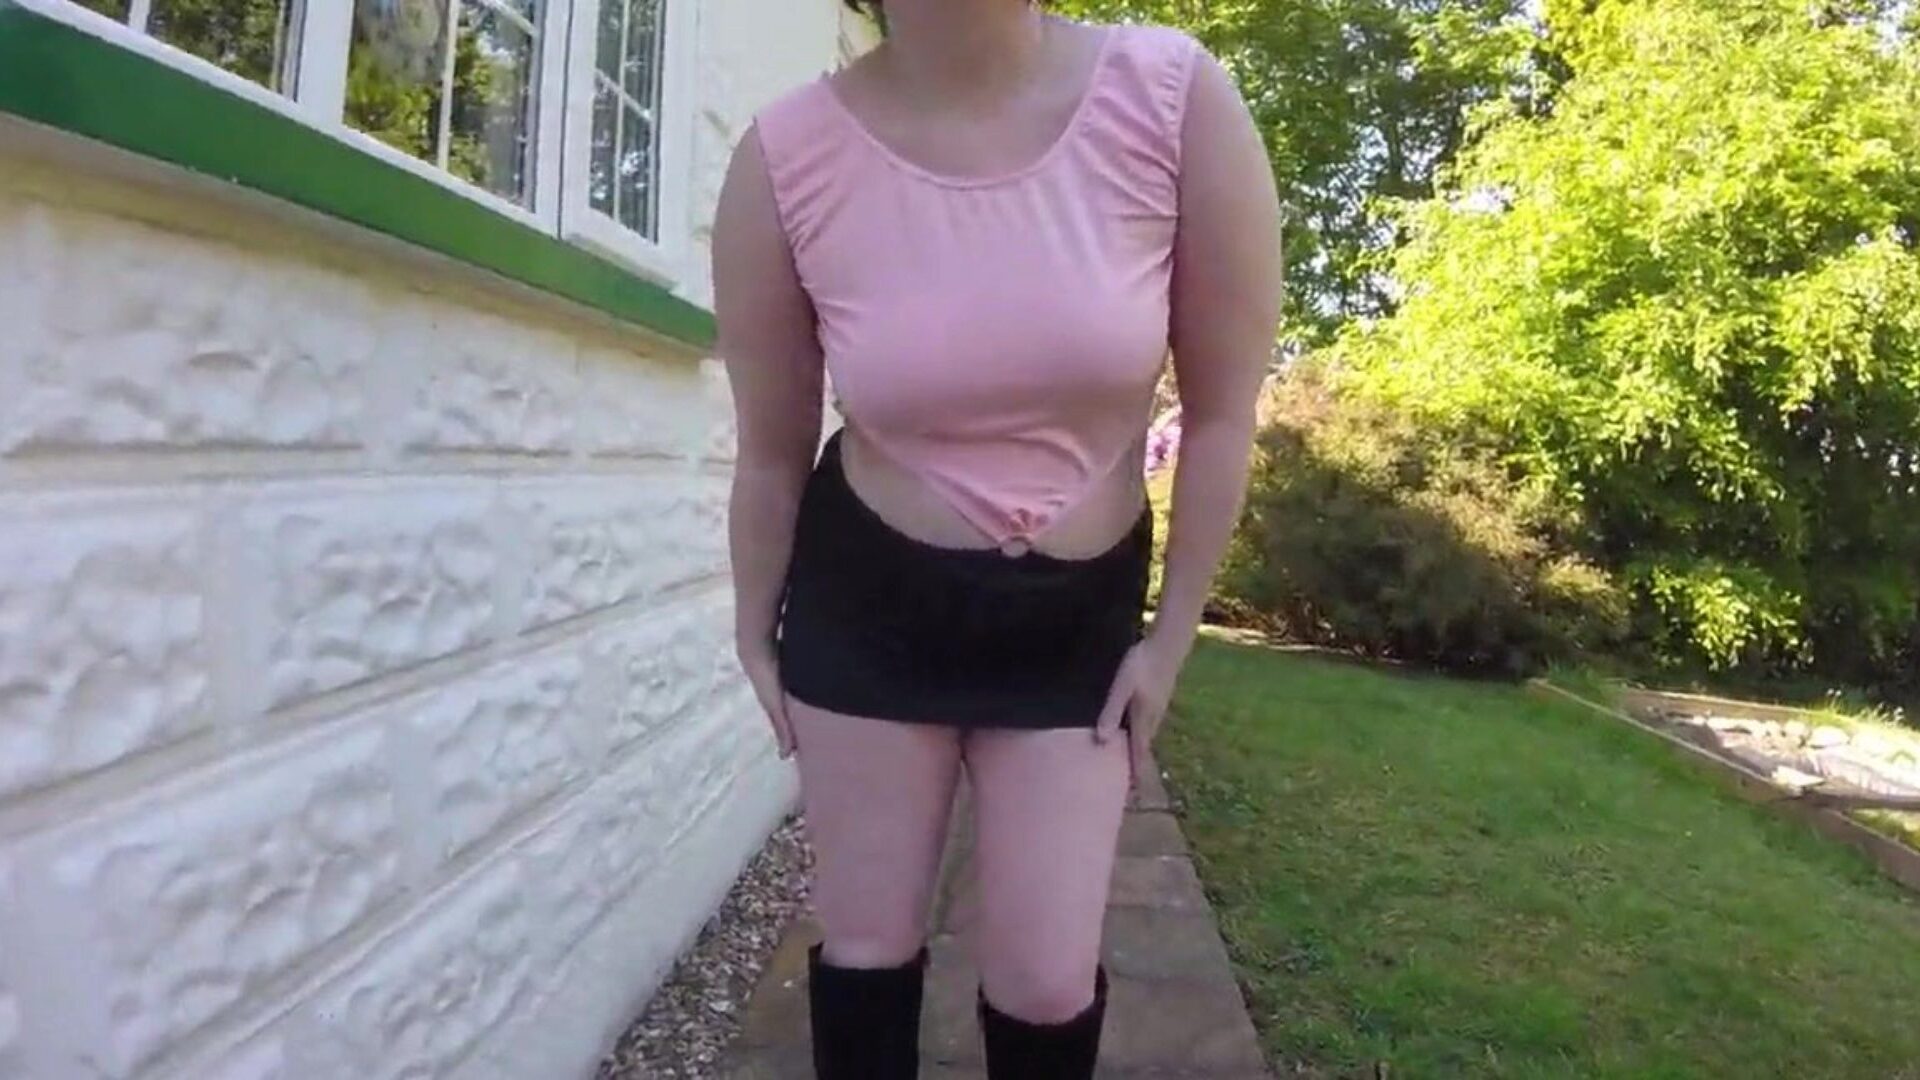 Leggy Wife Strips Outdoors Boots and Miniskirt: HD Porn f4 Watch Leggy Wife Strips Outdoors Boots and Miniskirt movie scene on xHamster - the ultimate collection of free-for-all British Free and Xxx HD hardcore porno tube movies